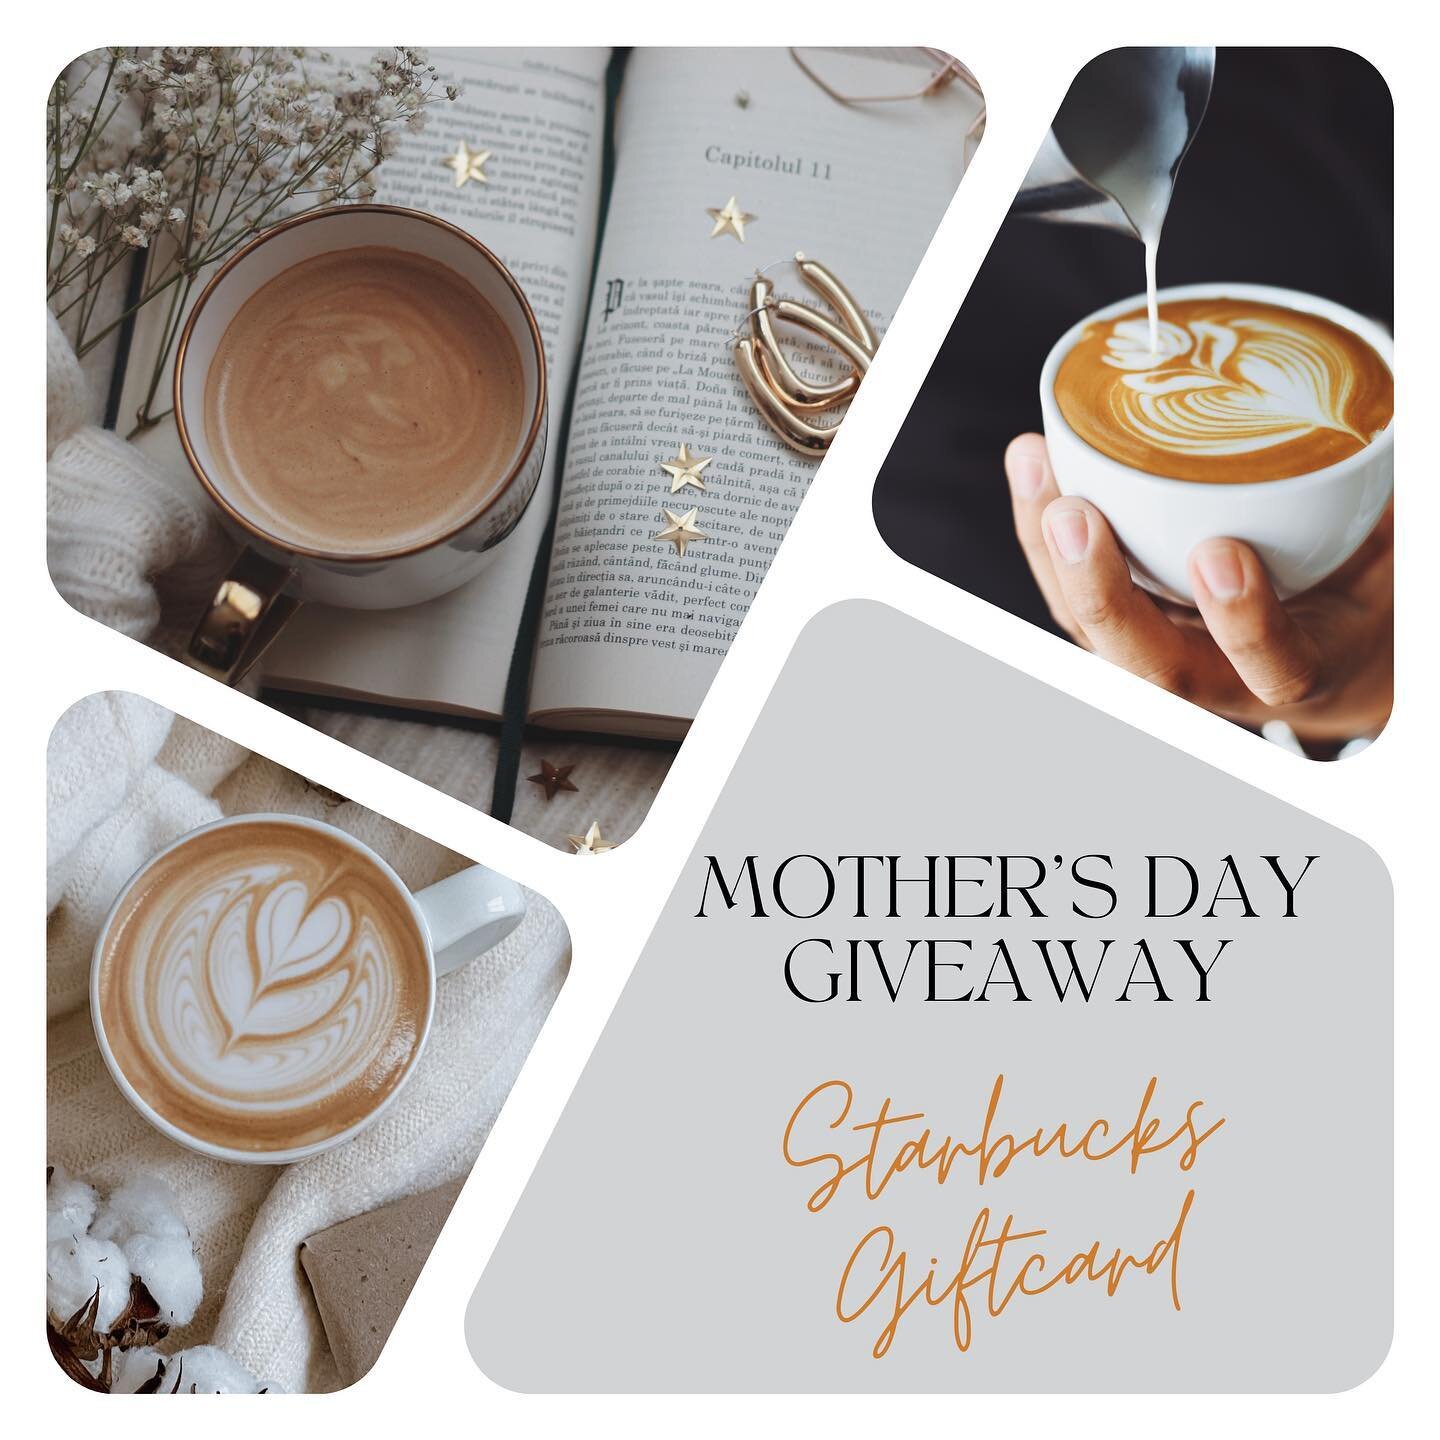 MOTHER&rsquo;S DAY GIVEAWAY!! 🤩⠀
⠀
@sleeptighttherapy is wanting to recognize all of the incredible mothers out there and what better way to show our appreciation than sending you a cup of coffee. 😉⠀
⠀
To enter this giveaway you must: ⠀
☕️ LIKE thi